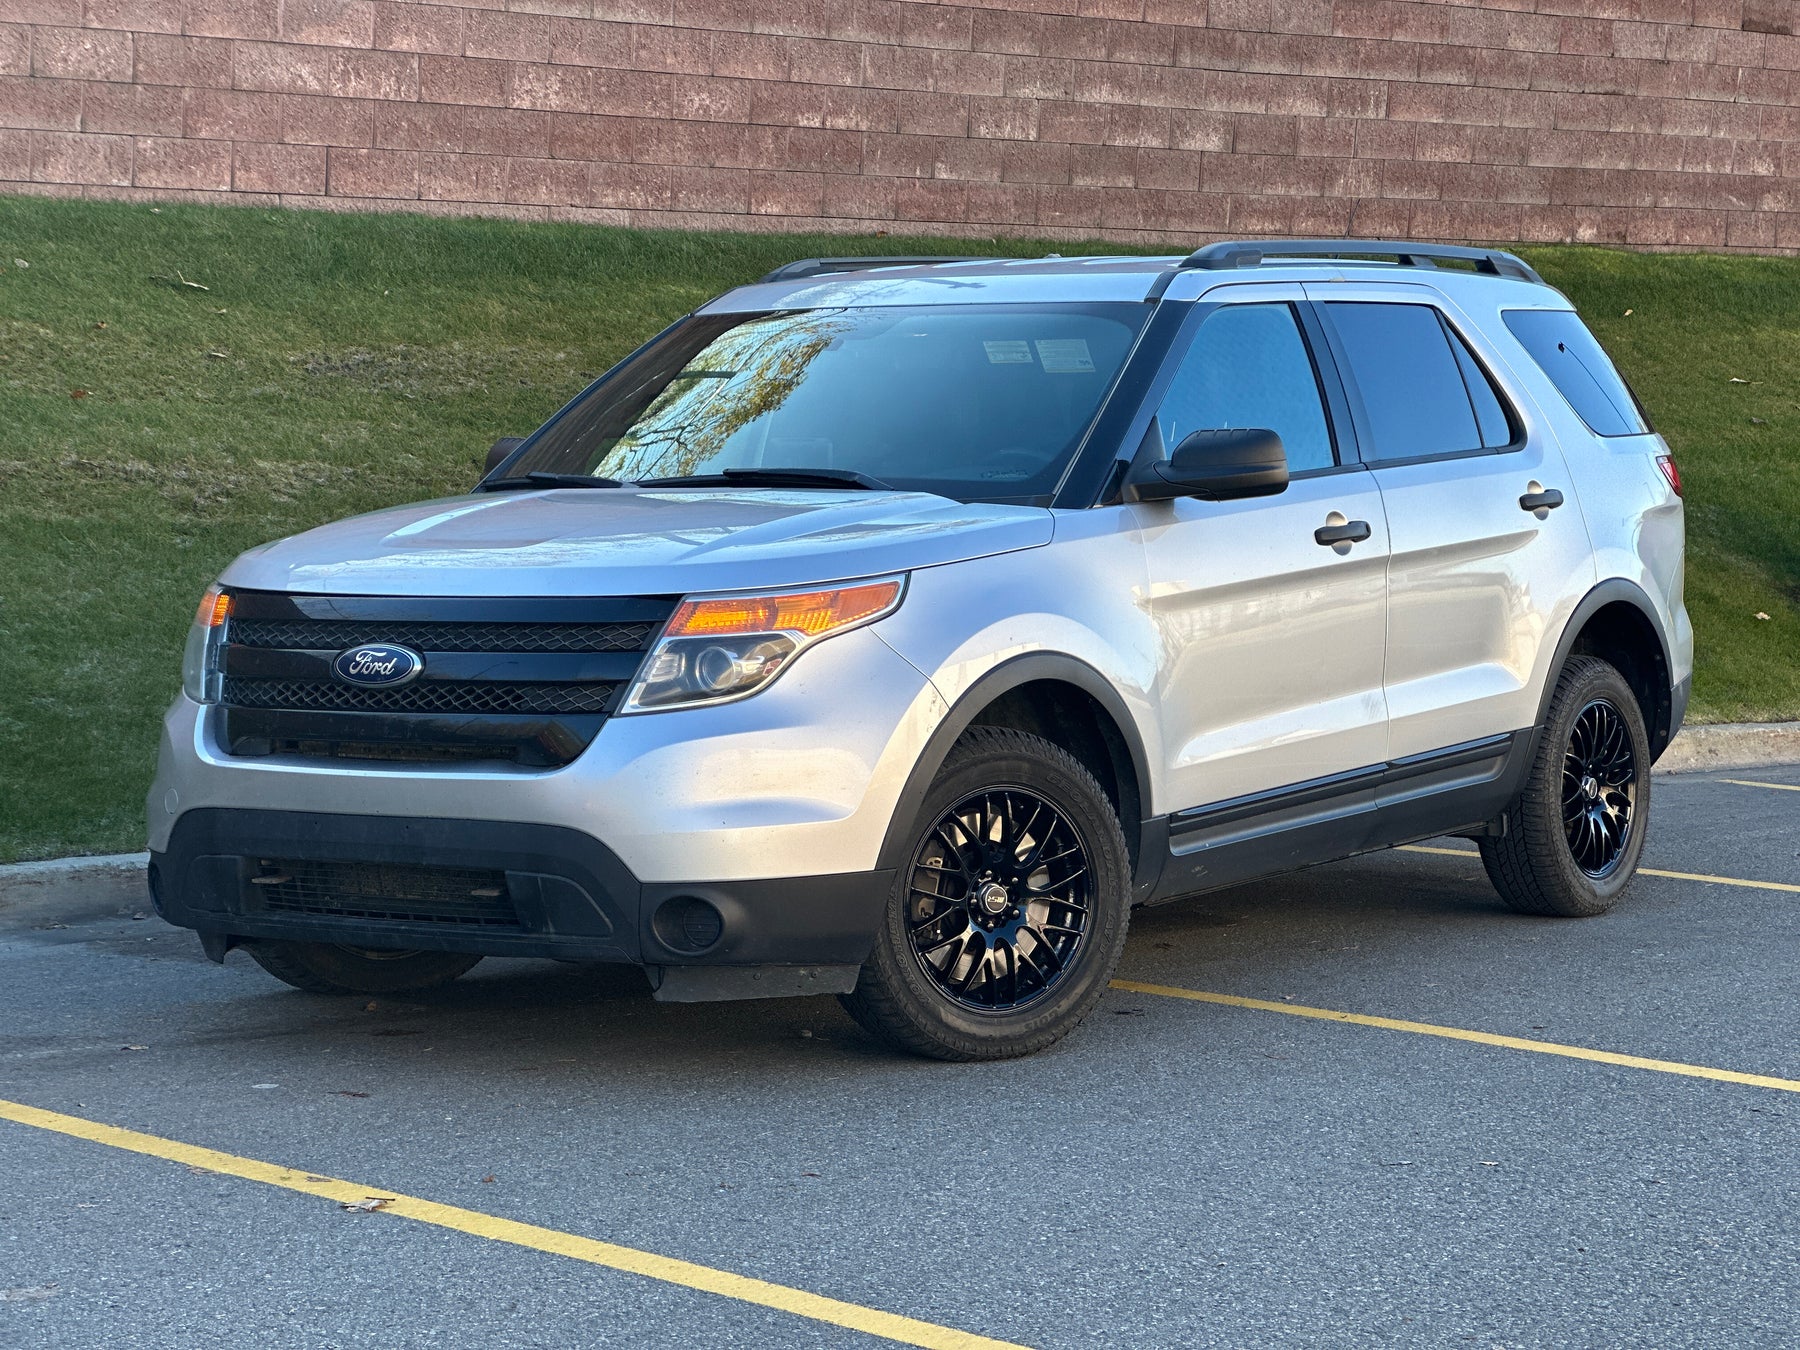 Ford Explorer/Police Interceptor Utility Installation and How-To Videos